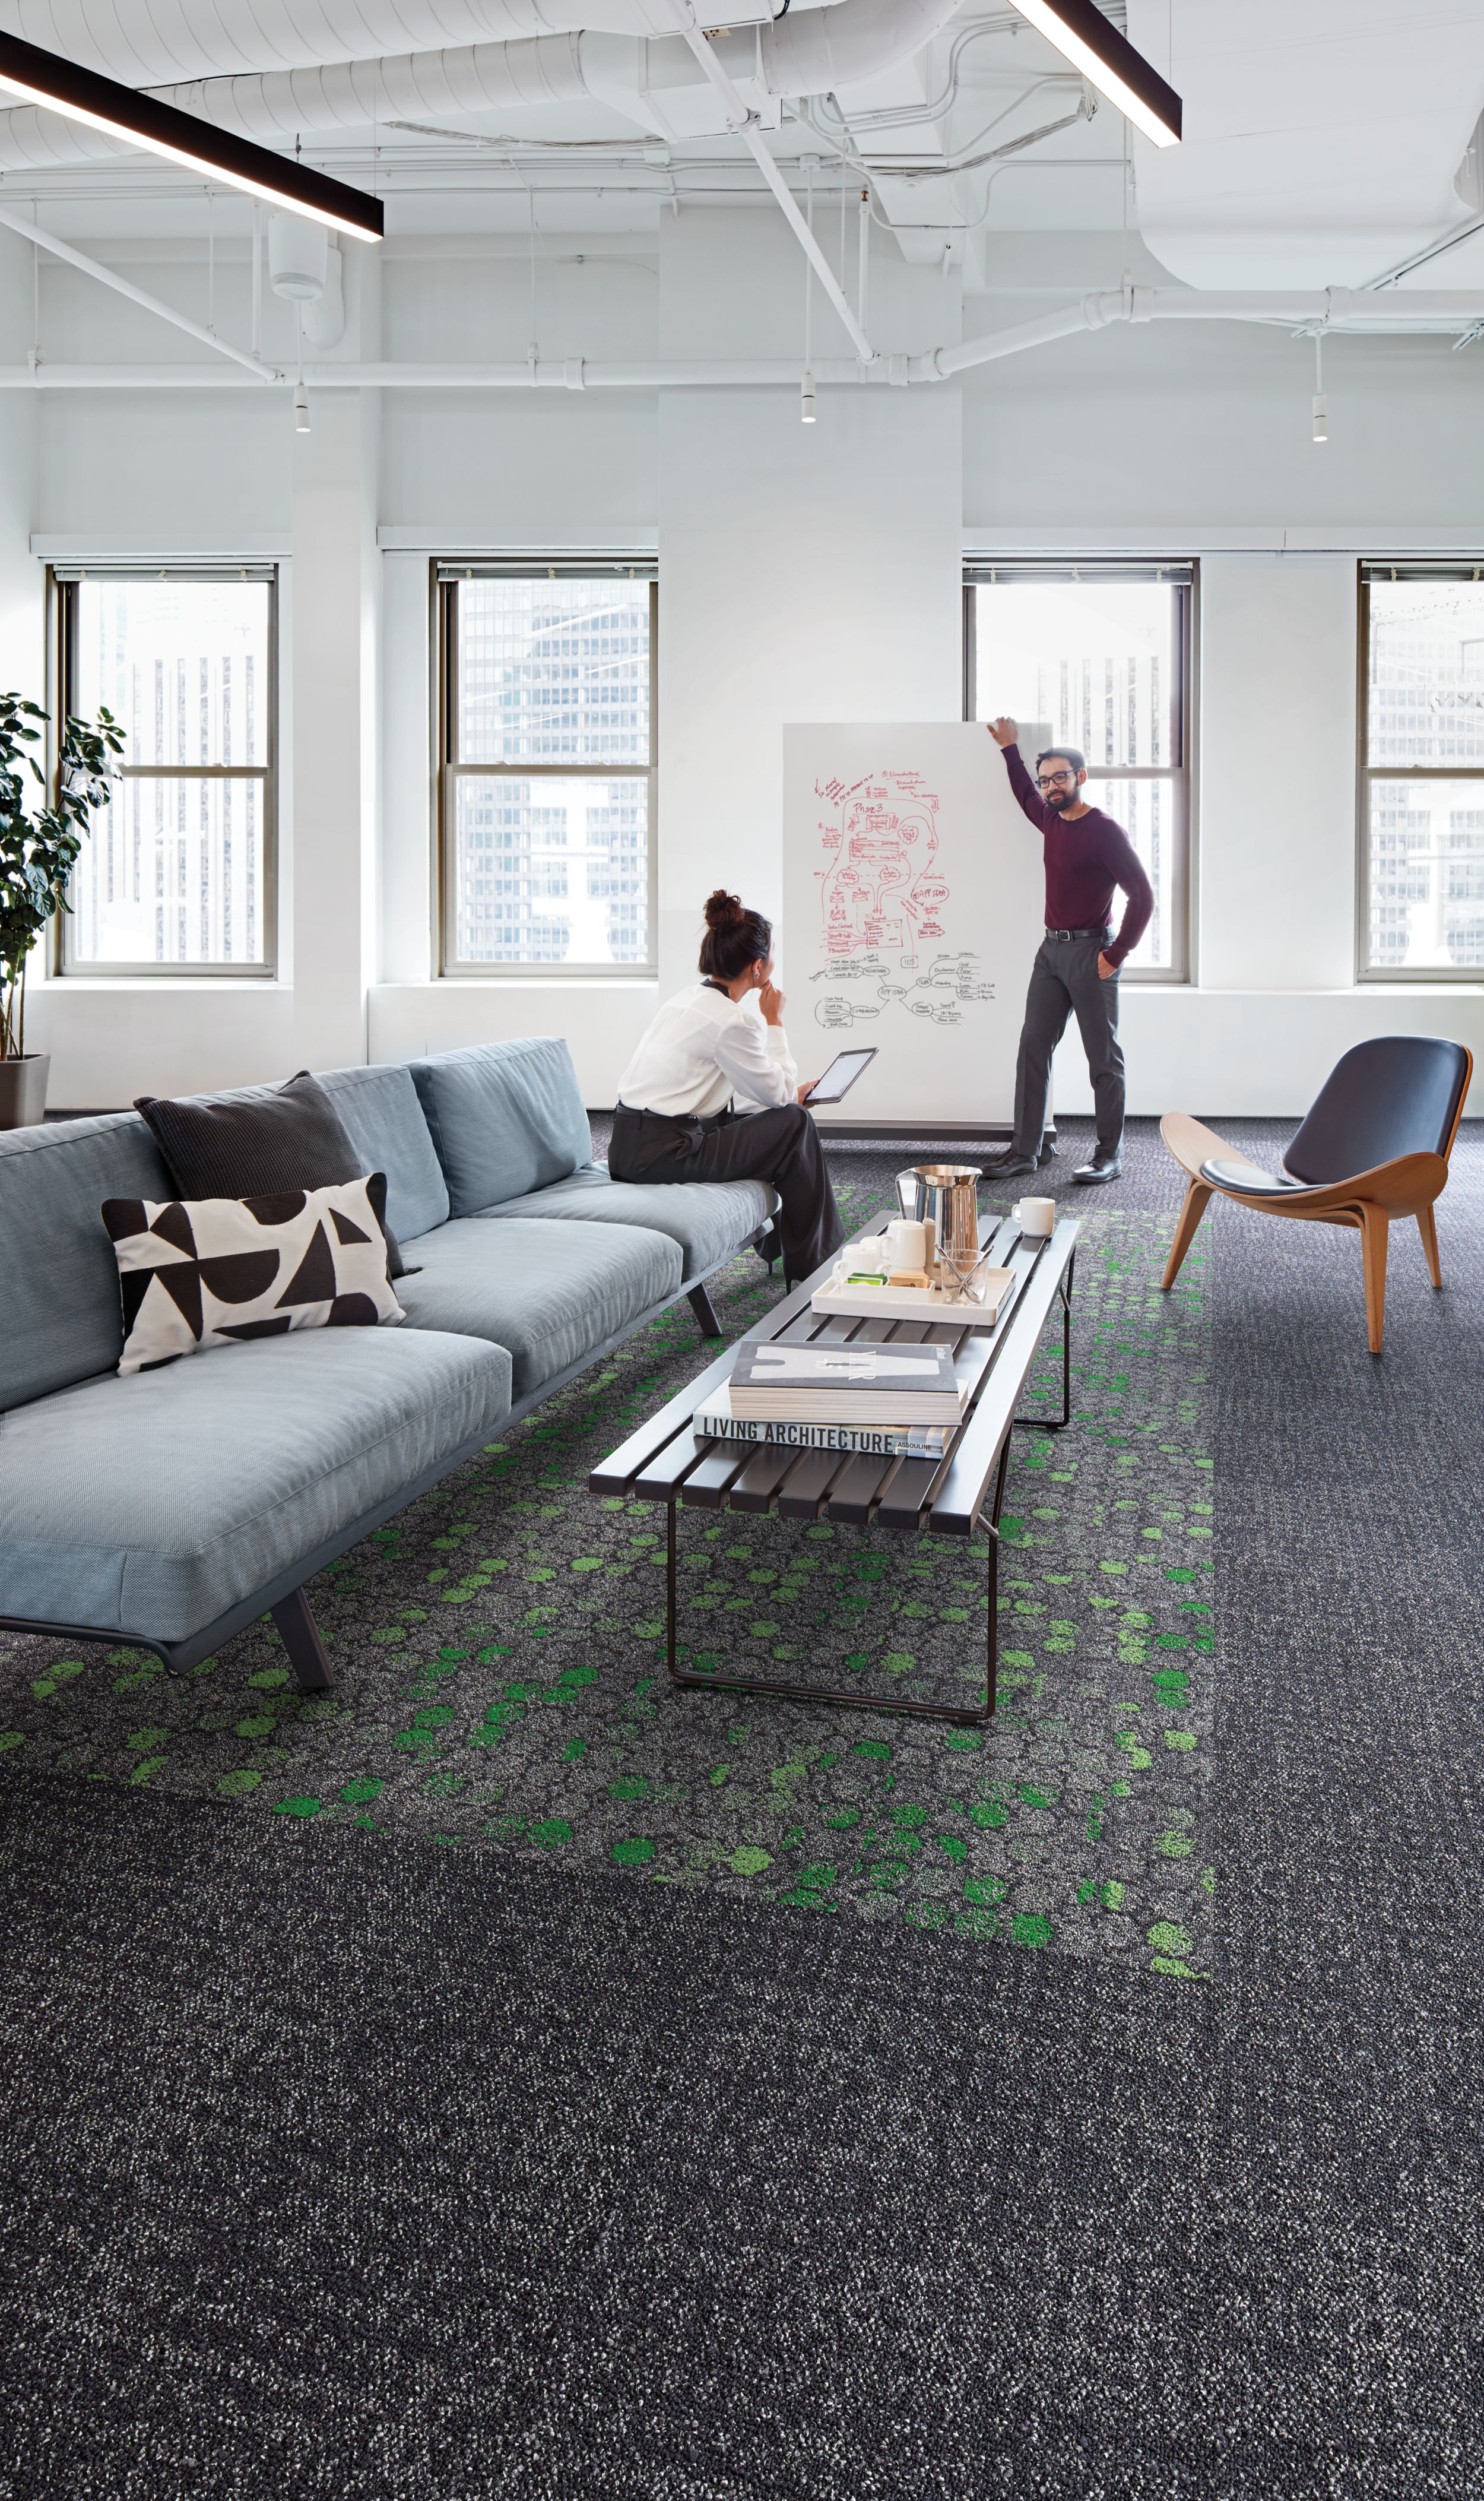 Interface Broome Street and Wheler Street in open office area with people Bildnummer 5